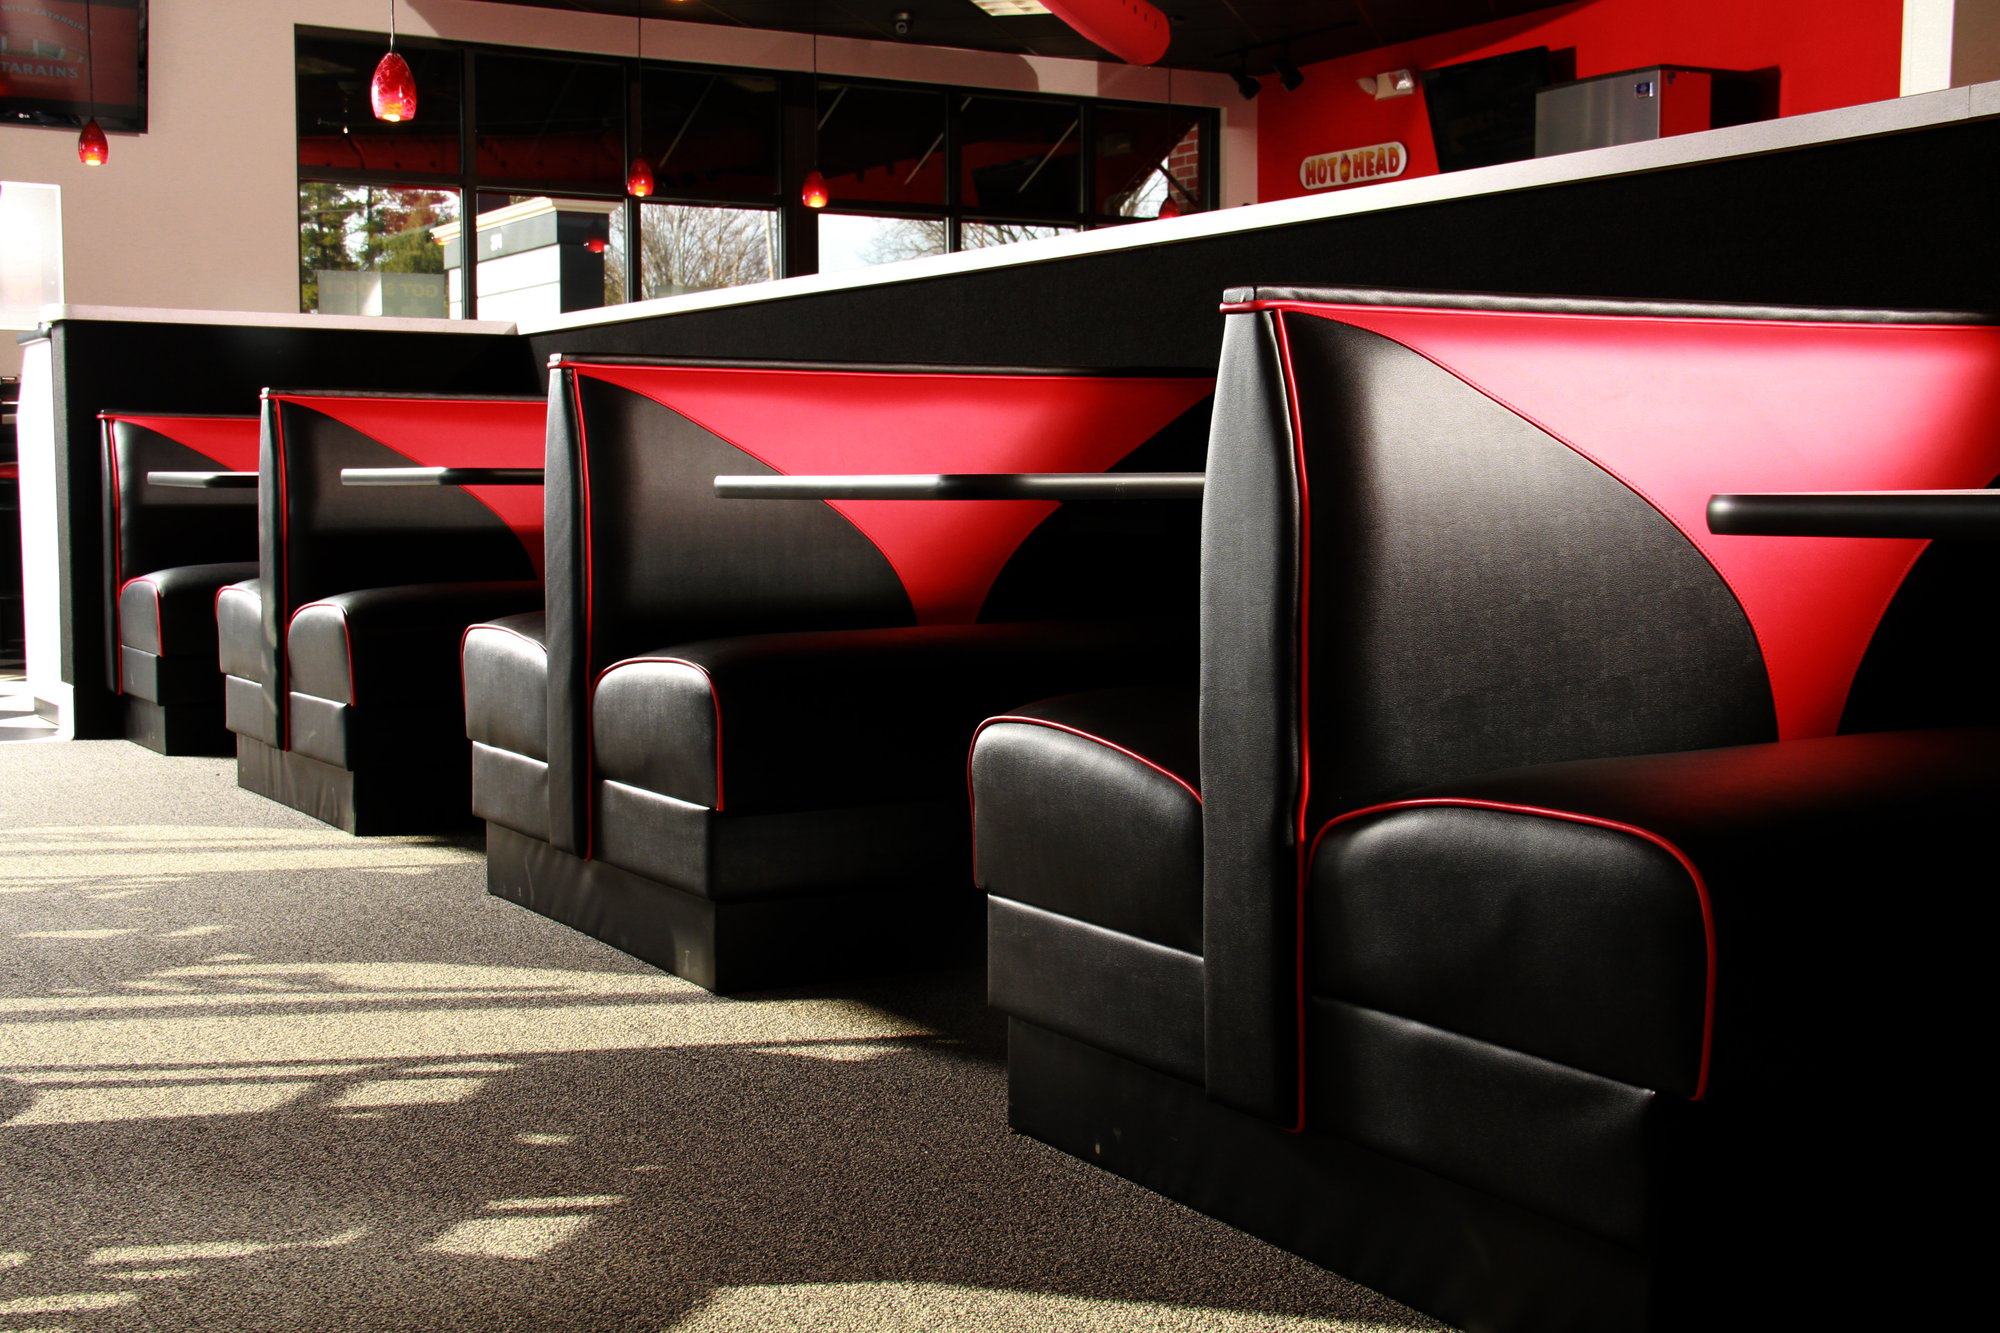 detailed-view-of-red-and-black-restaurant-seating-booth